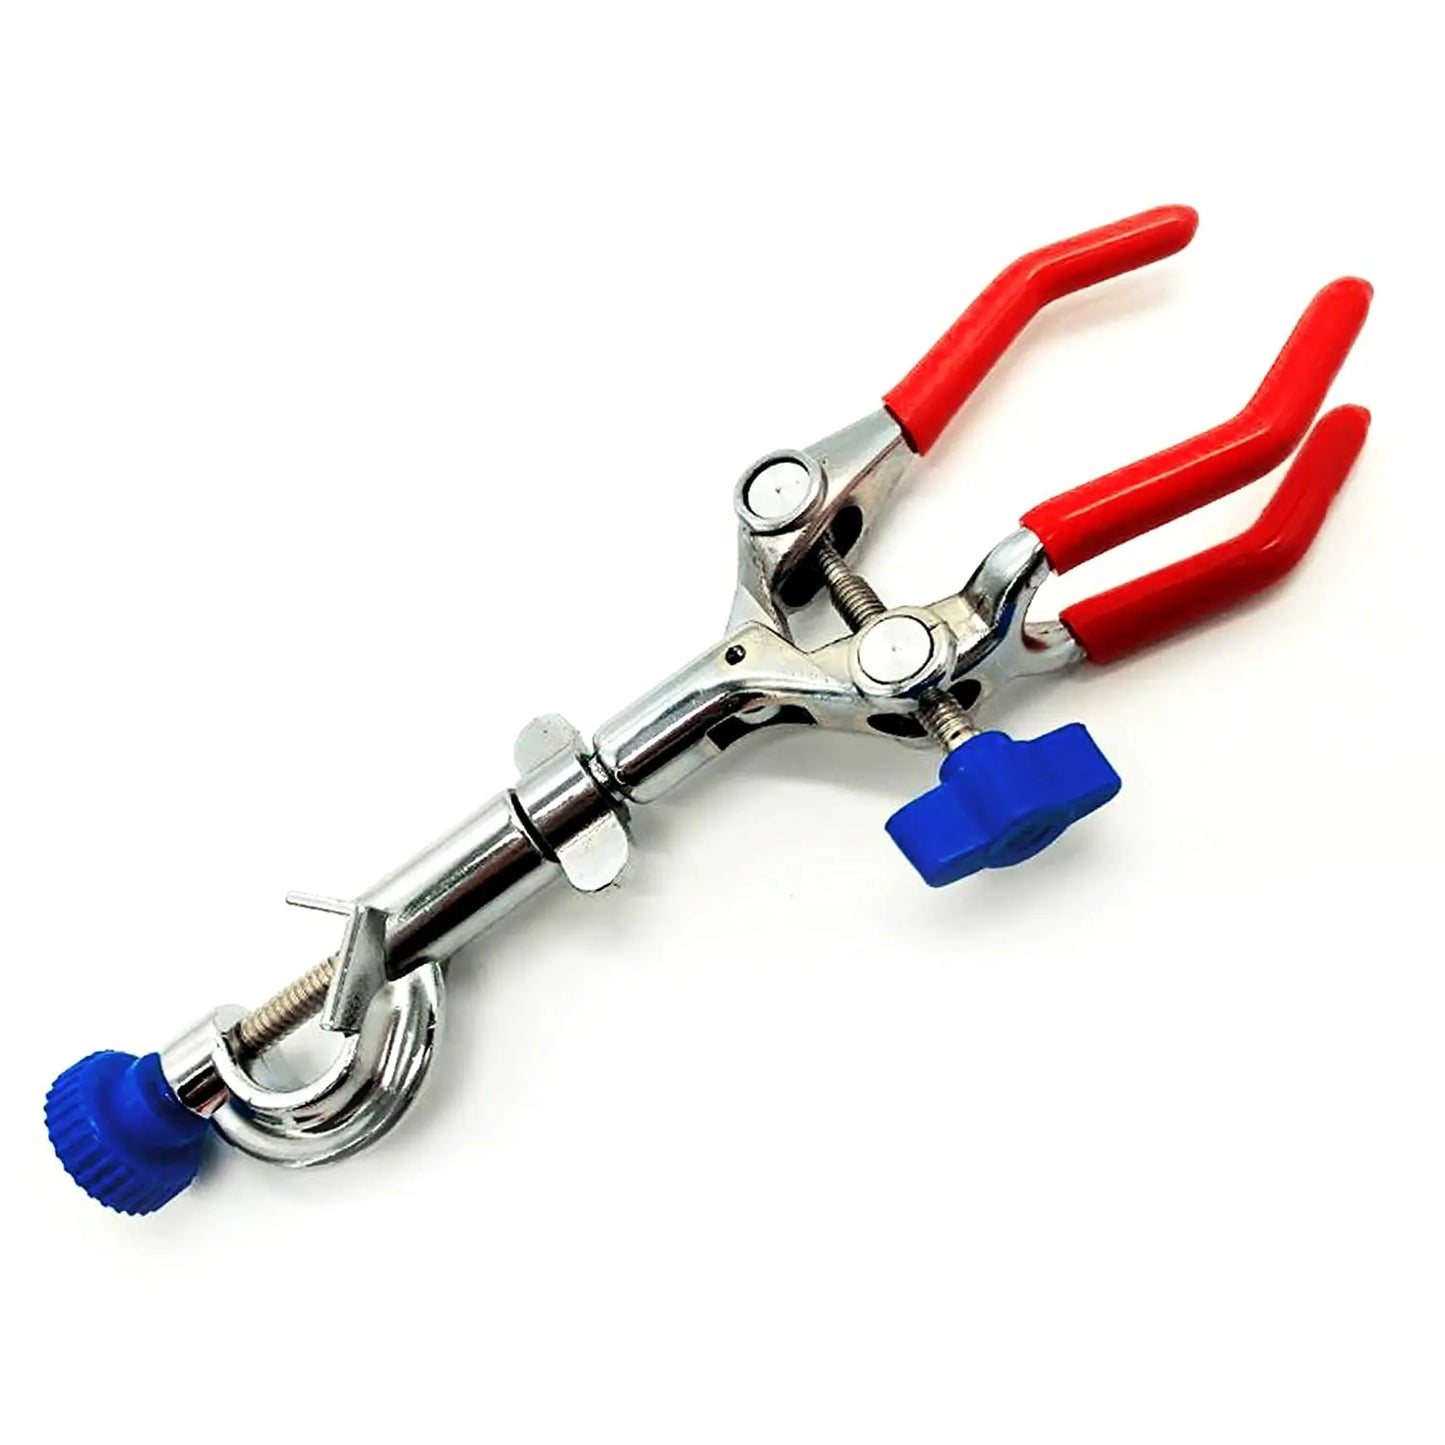 Lab Clamp 3 Prong Finger Style Laboratory 360°Swivel Type Rubber-Coated Head - Viking Lab Supply